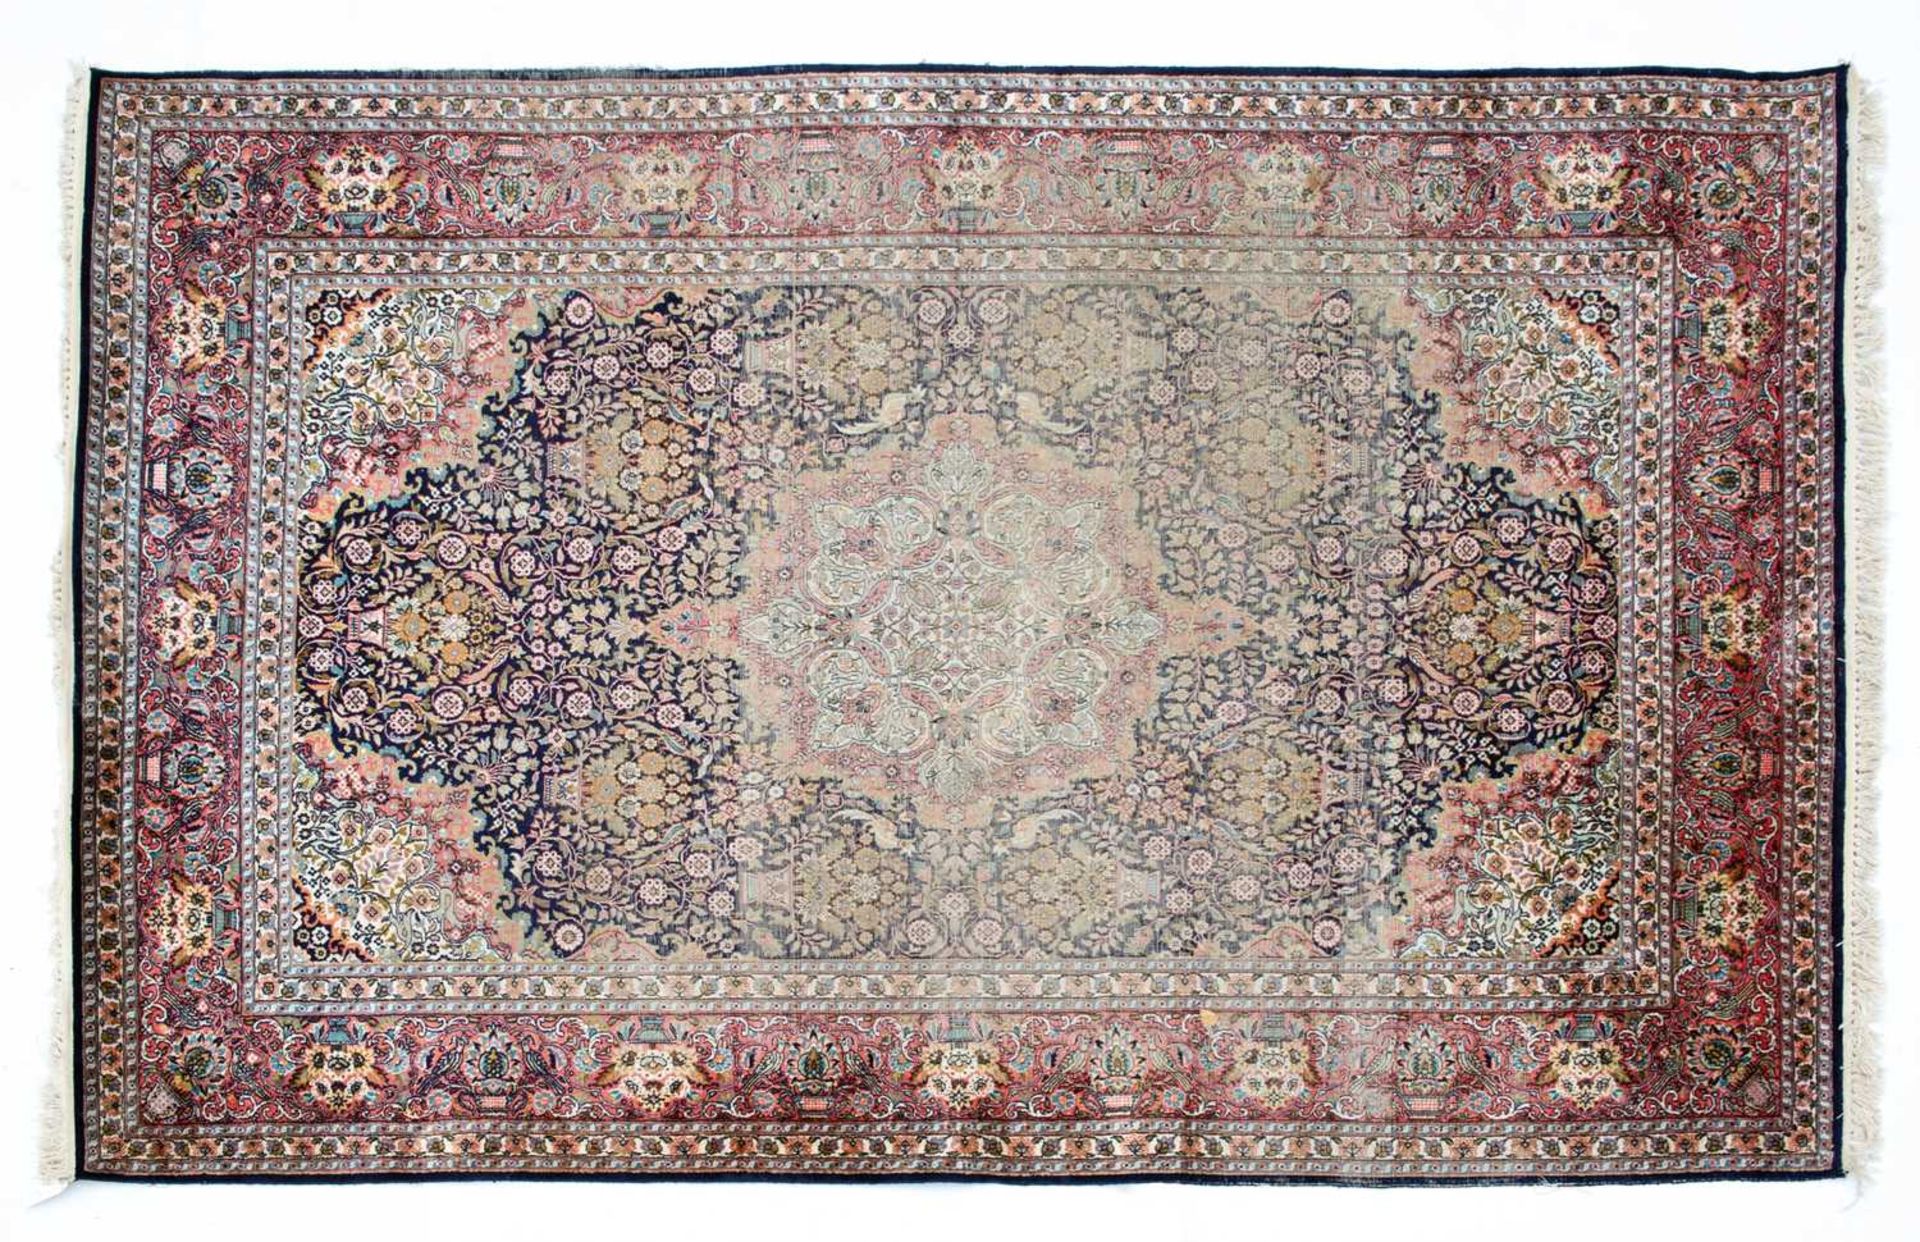 An Indian blue and red ground part silk rug